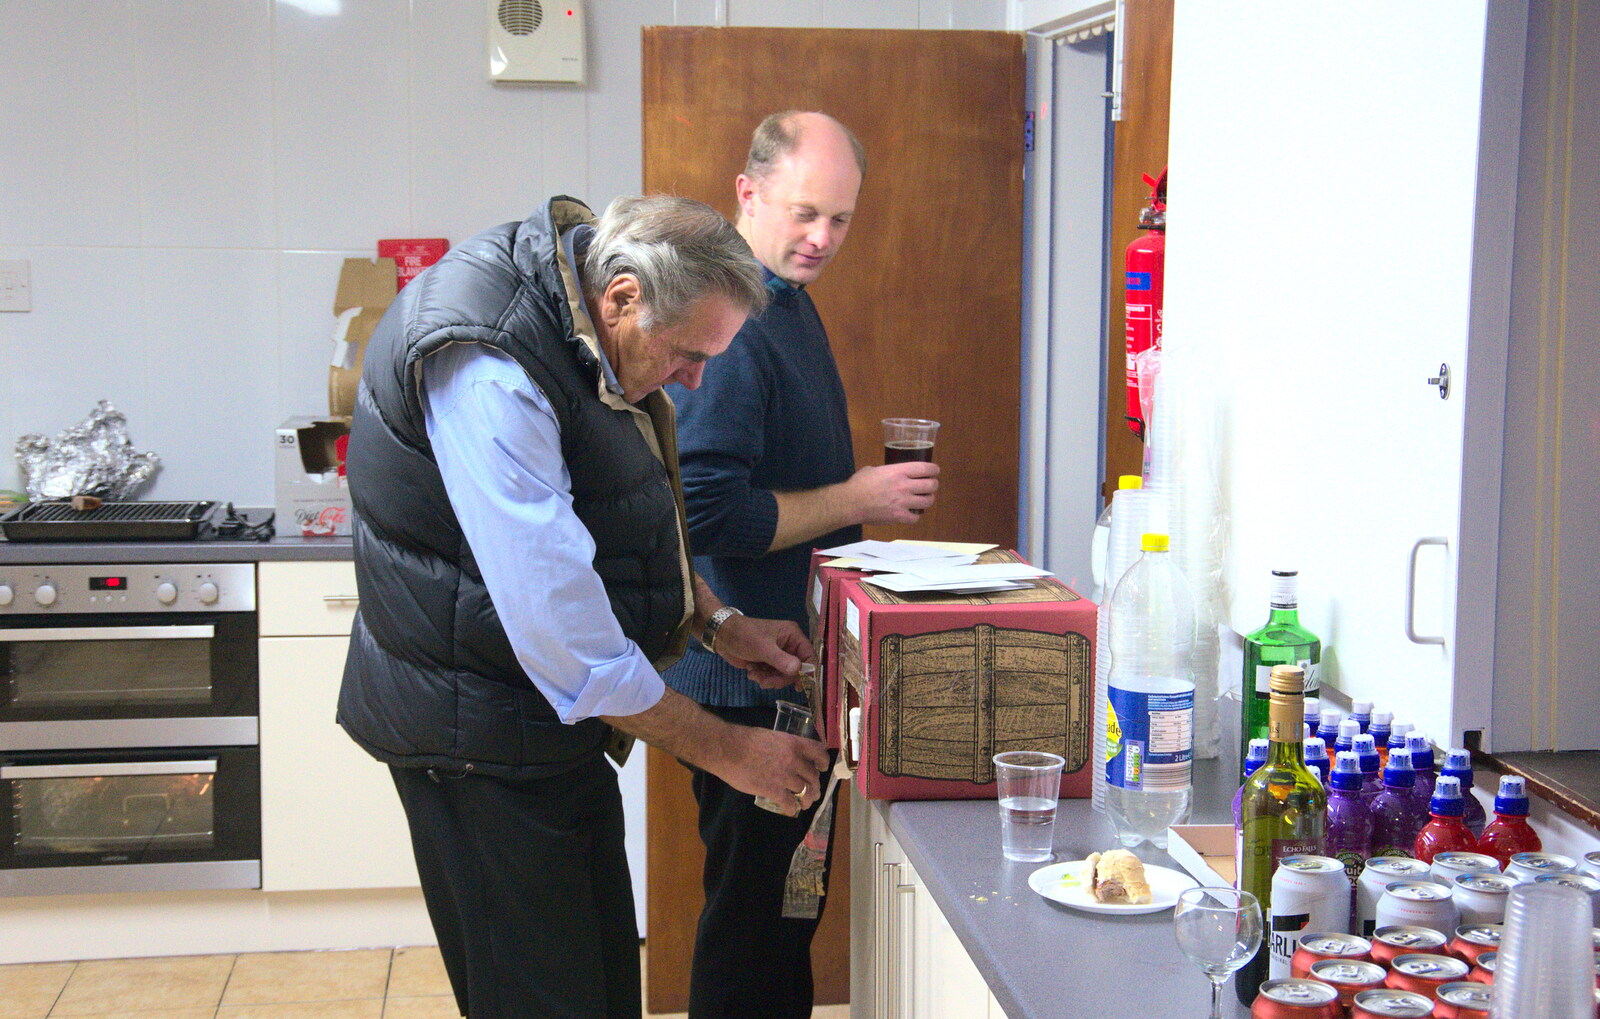 Alan gets a beer as Paul looks on from Bill's Birthday, The Lophams Village Hall, Norfolk - 9th December 2017